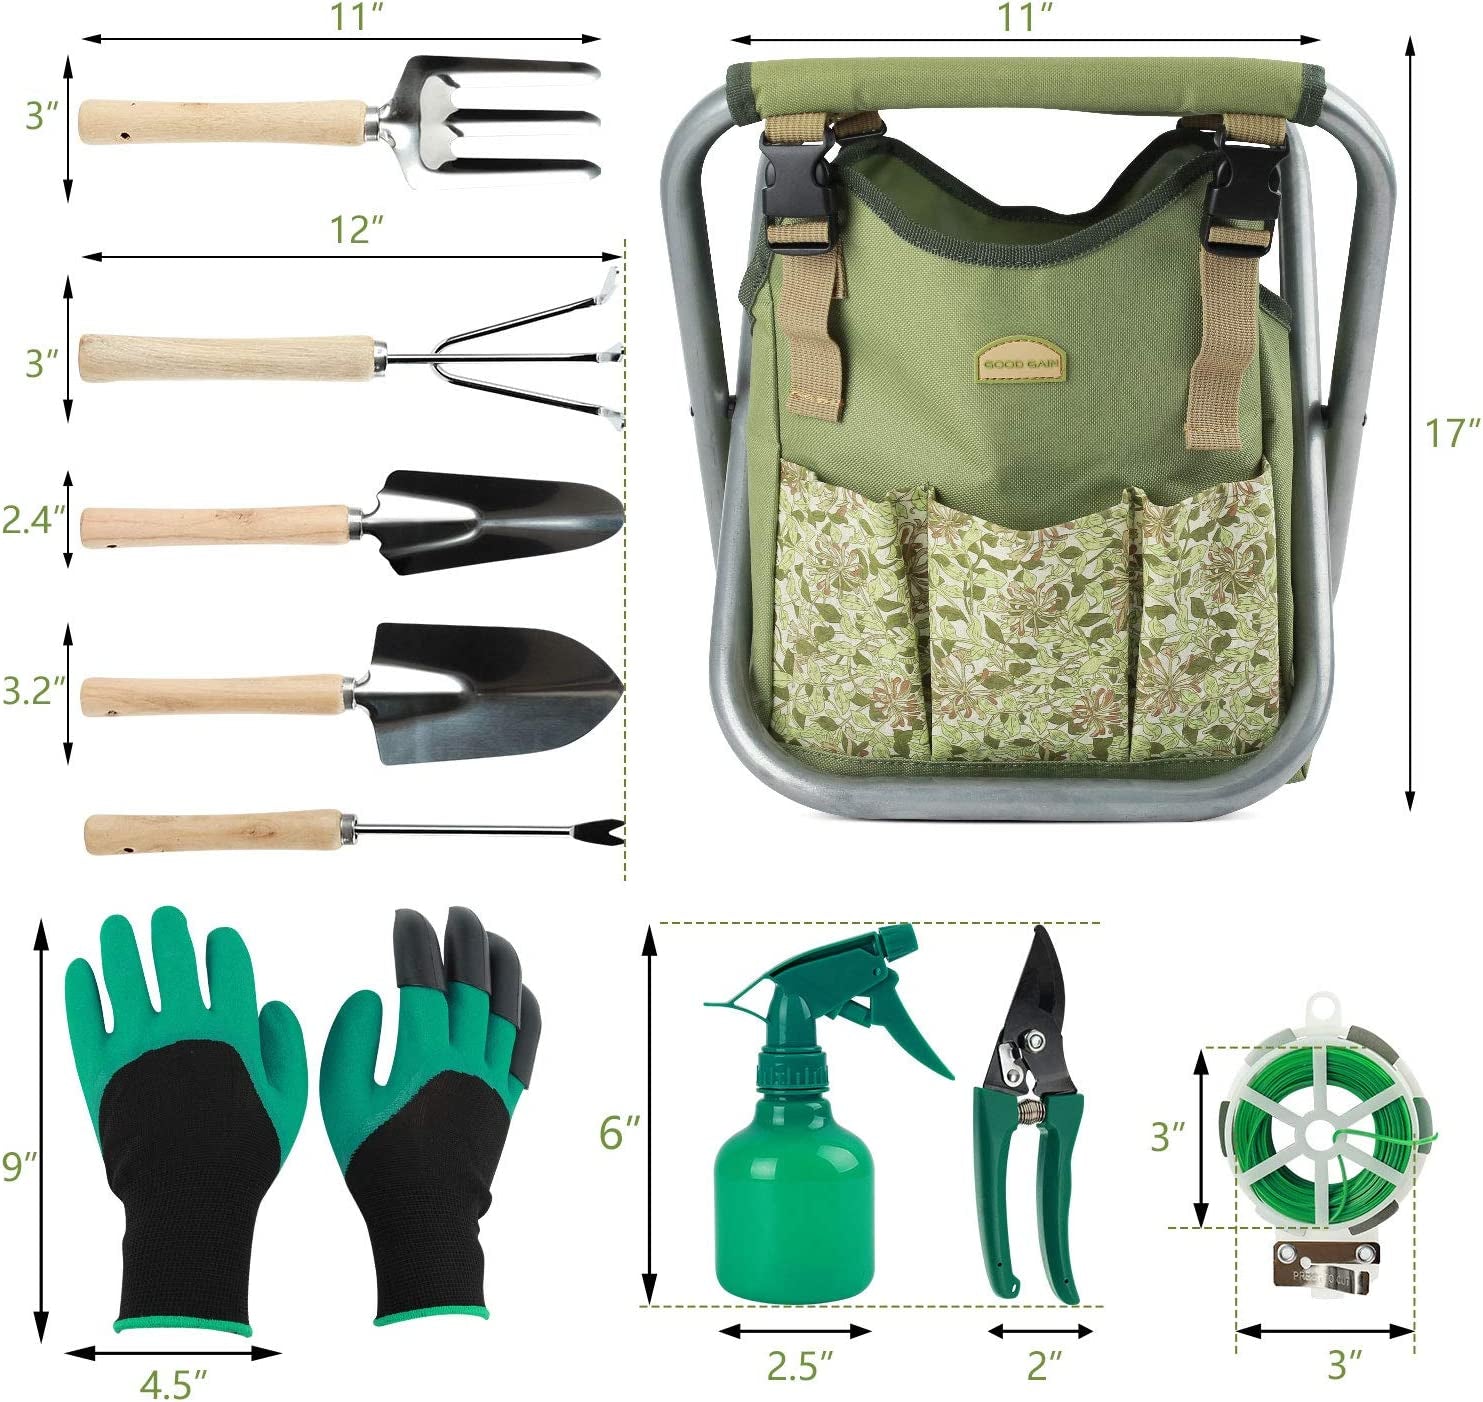 G GOOD GAIN, GOOD GAIN Garden Tools Stool, 12 Pcs Gardening Hand Tools Set with Folding Chair Seat and Garden Storage Tote Bag, Garden Tools Carrier, Digging, Gardening Gifts Set for Mom/Dad and Gardeners. Honeysuckle